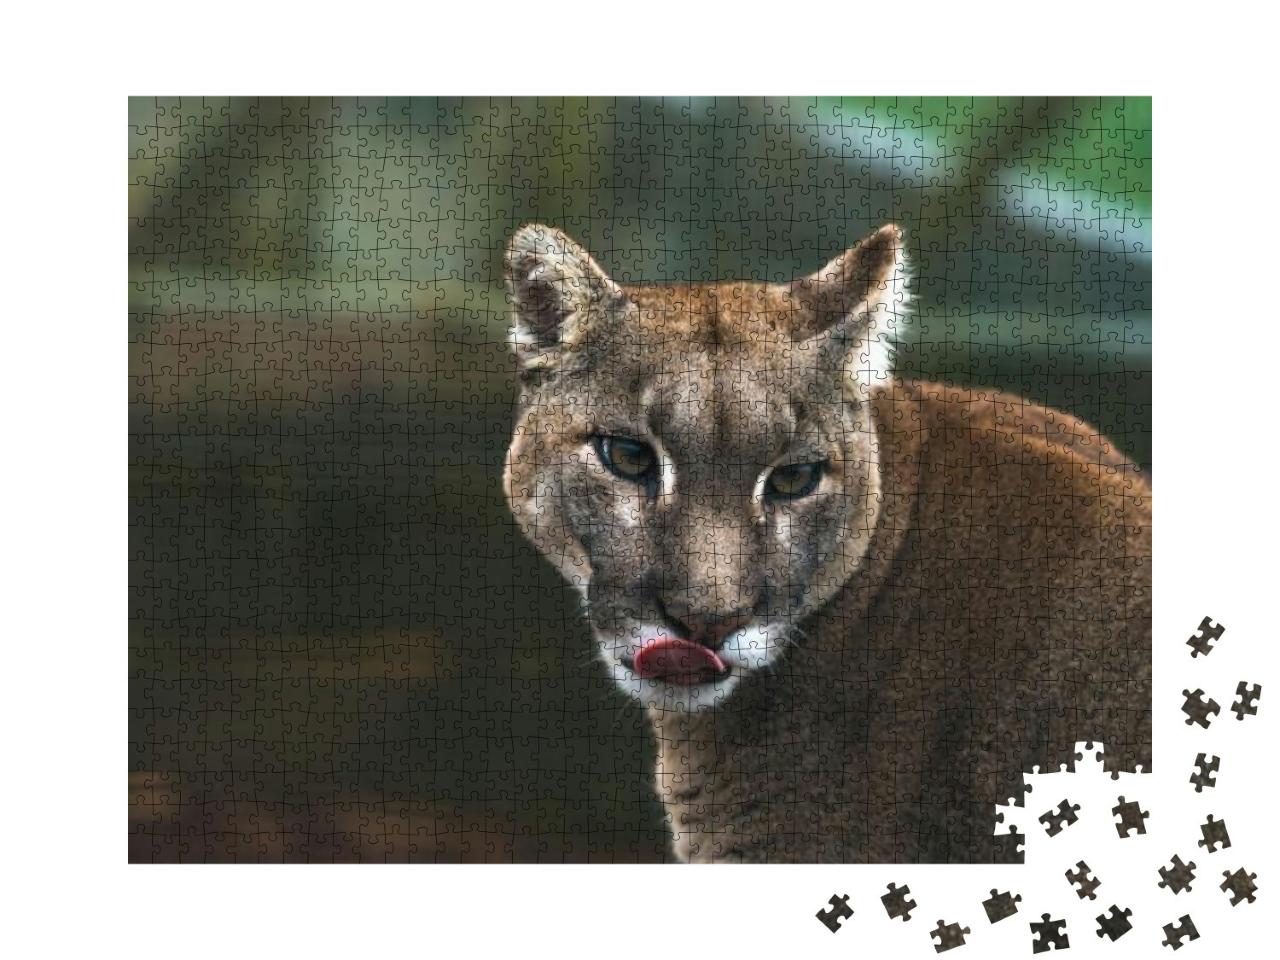 Puma Puma Concolor, a Large Cat Mainly Found in... Jigsaw Puzzle with 1000 pieces